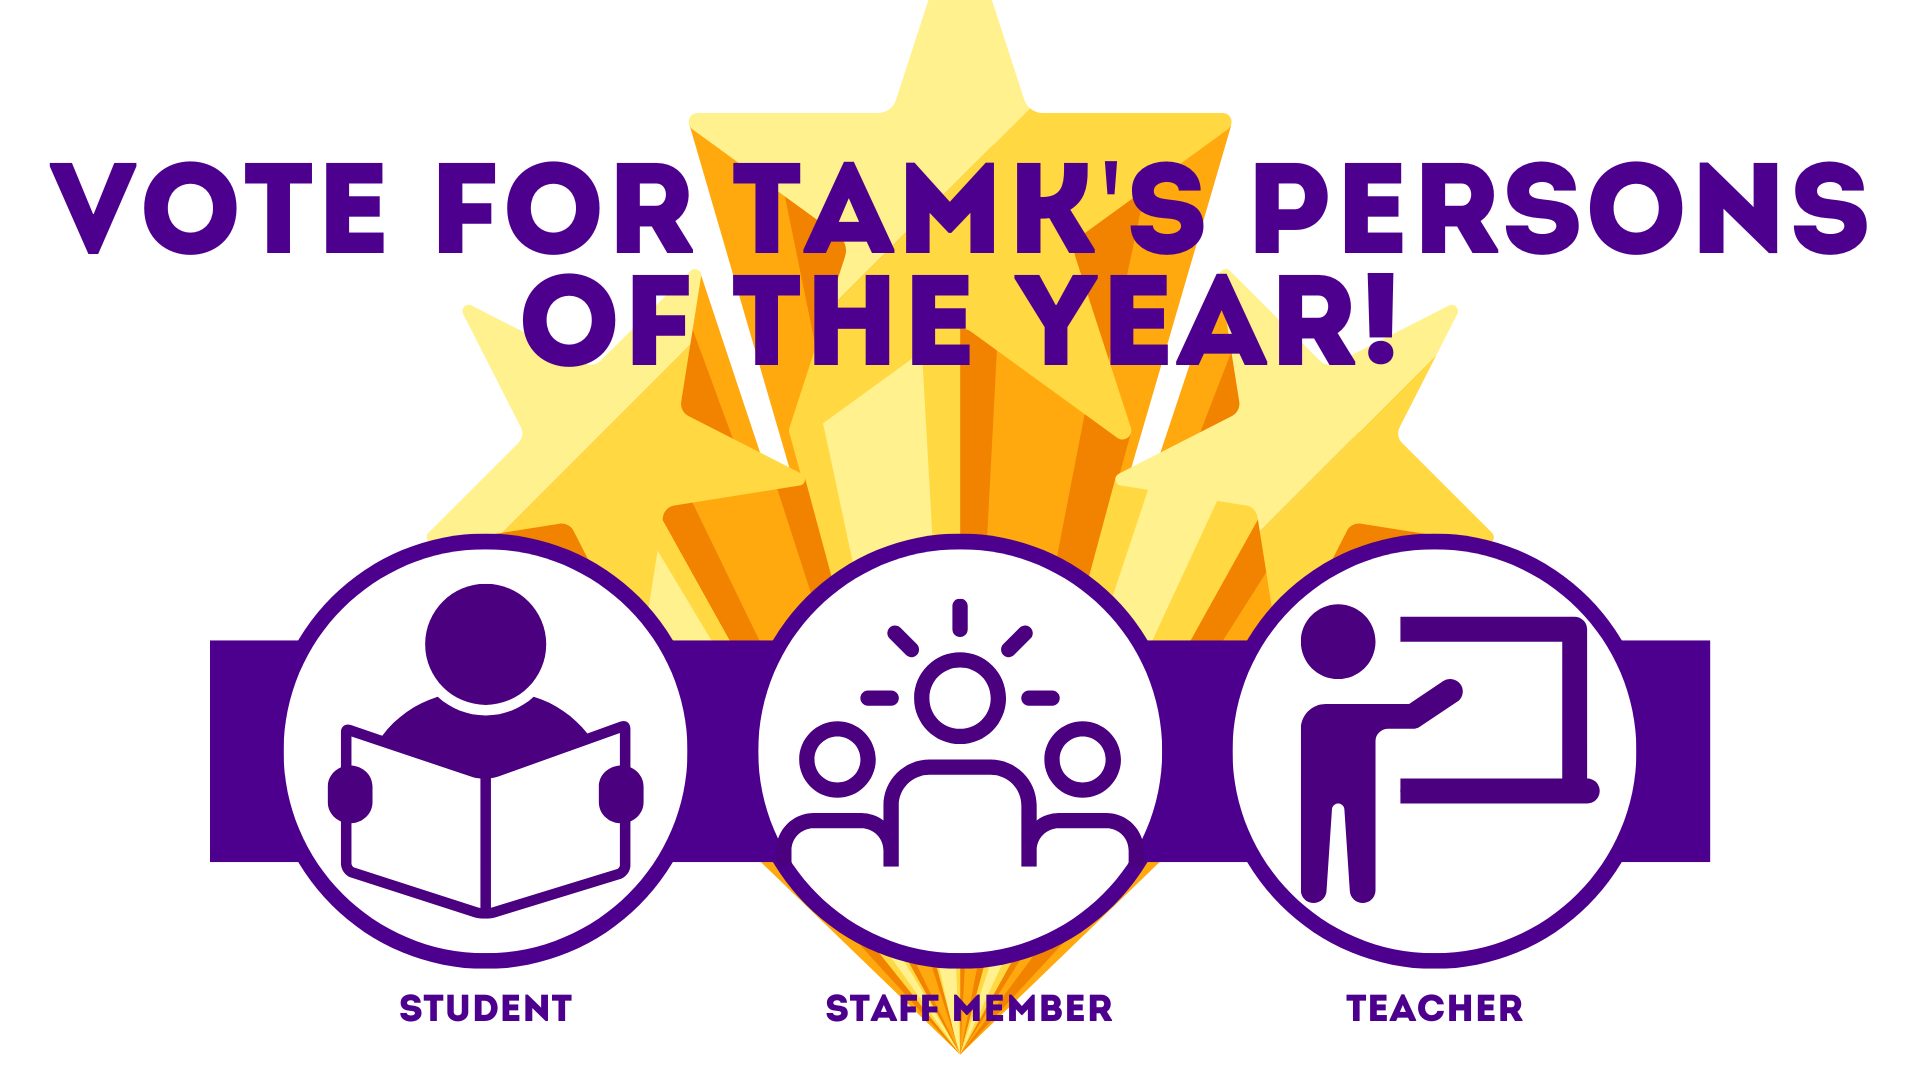 Vote for the TAMK’s student, staff member and teacher of the year!